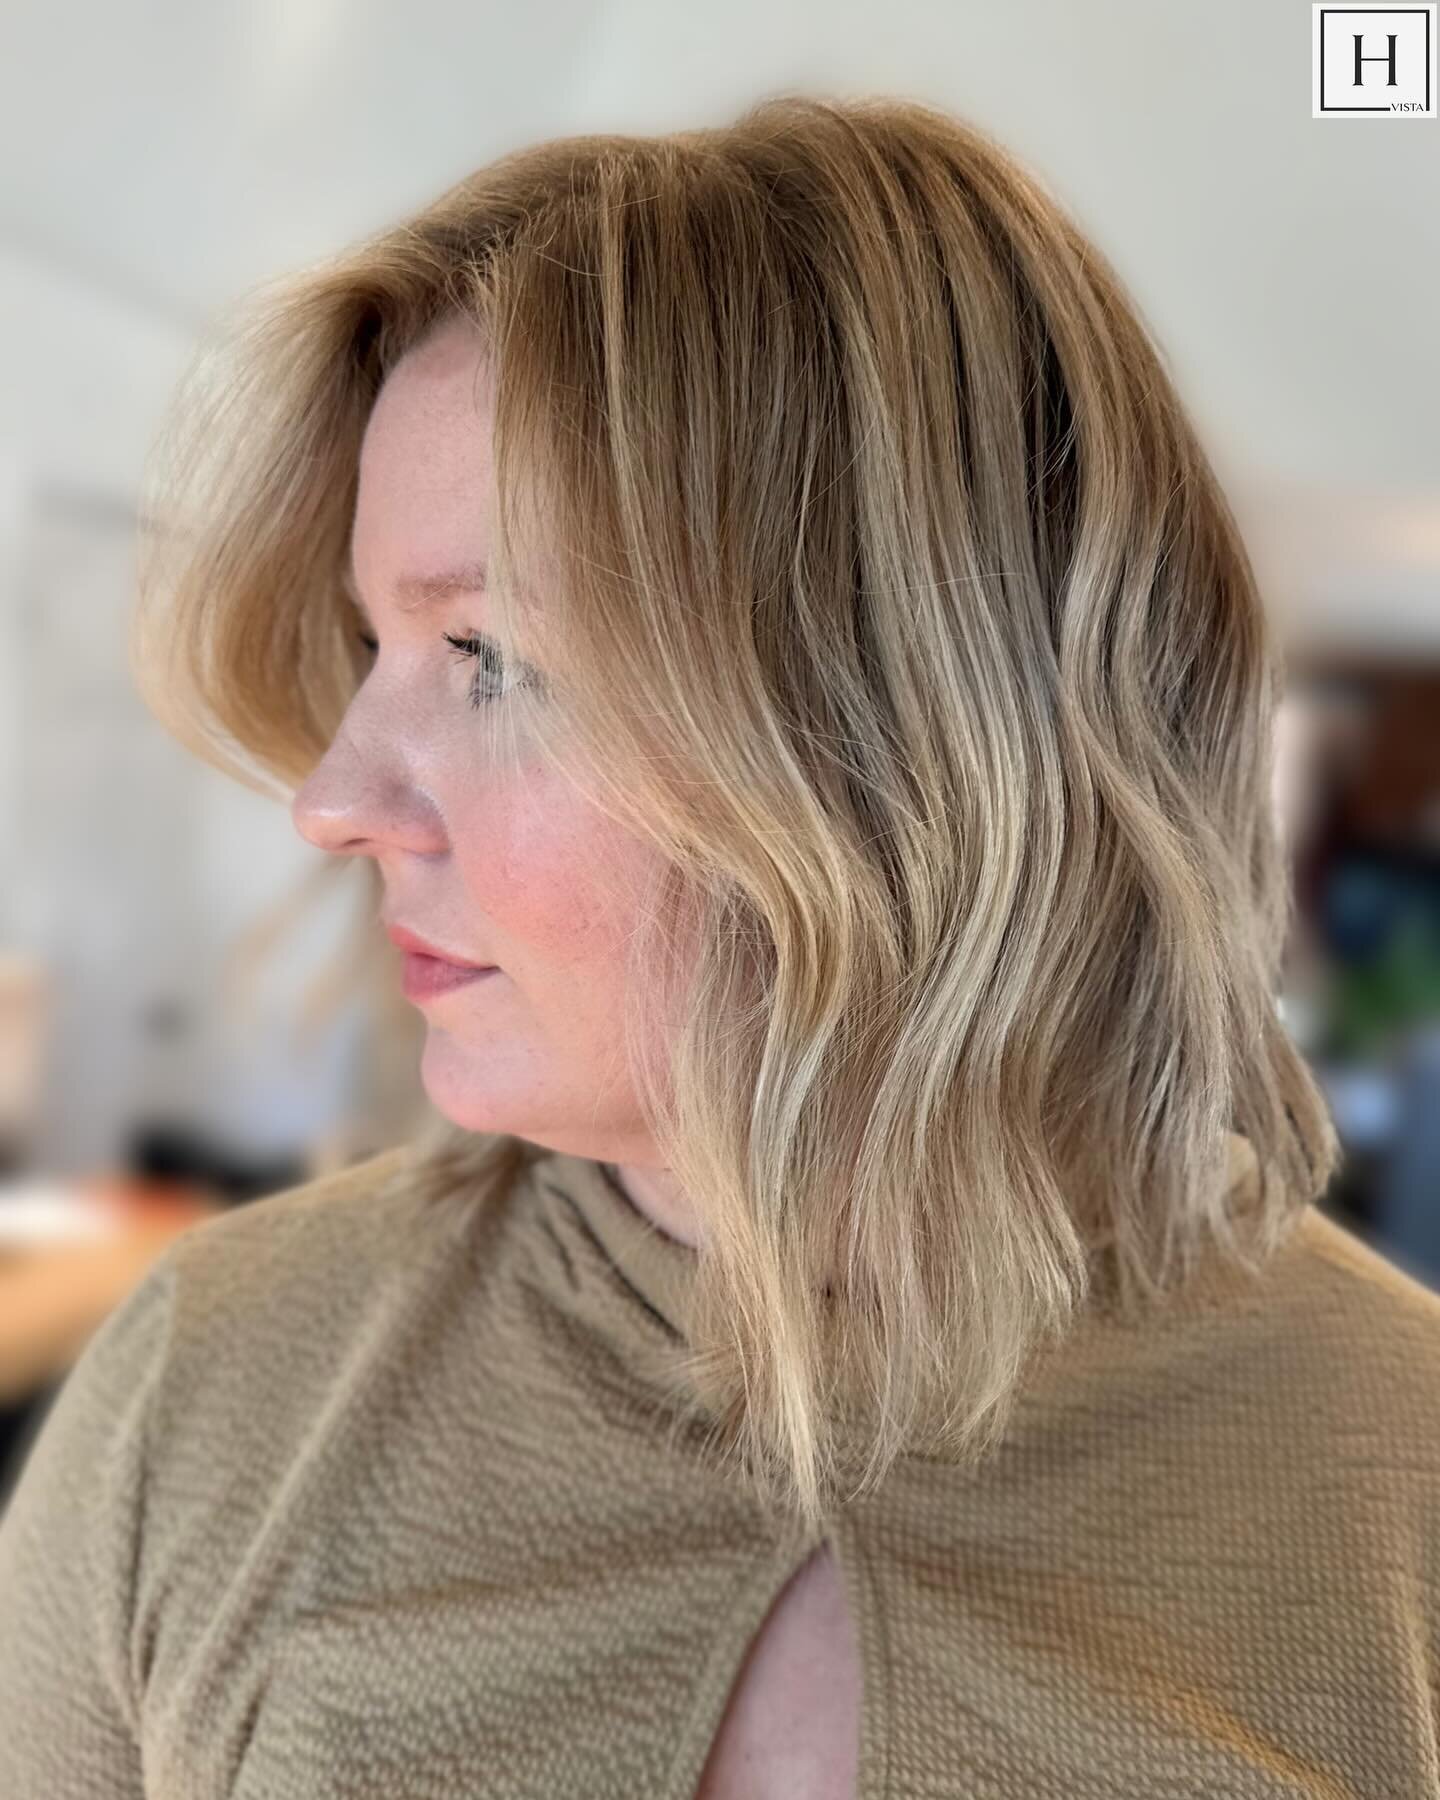 A new hairstyle is like a breath of fresh air 🤍

Stylist: @styledbyali.mac 

#hair #hairstylist #hairsalon #hydevista #thevista #columbiasc #downtowncola #newhairstyle